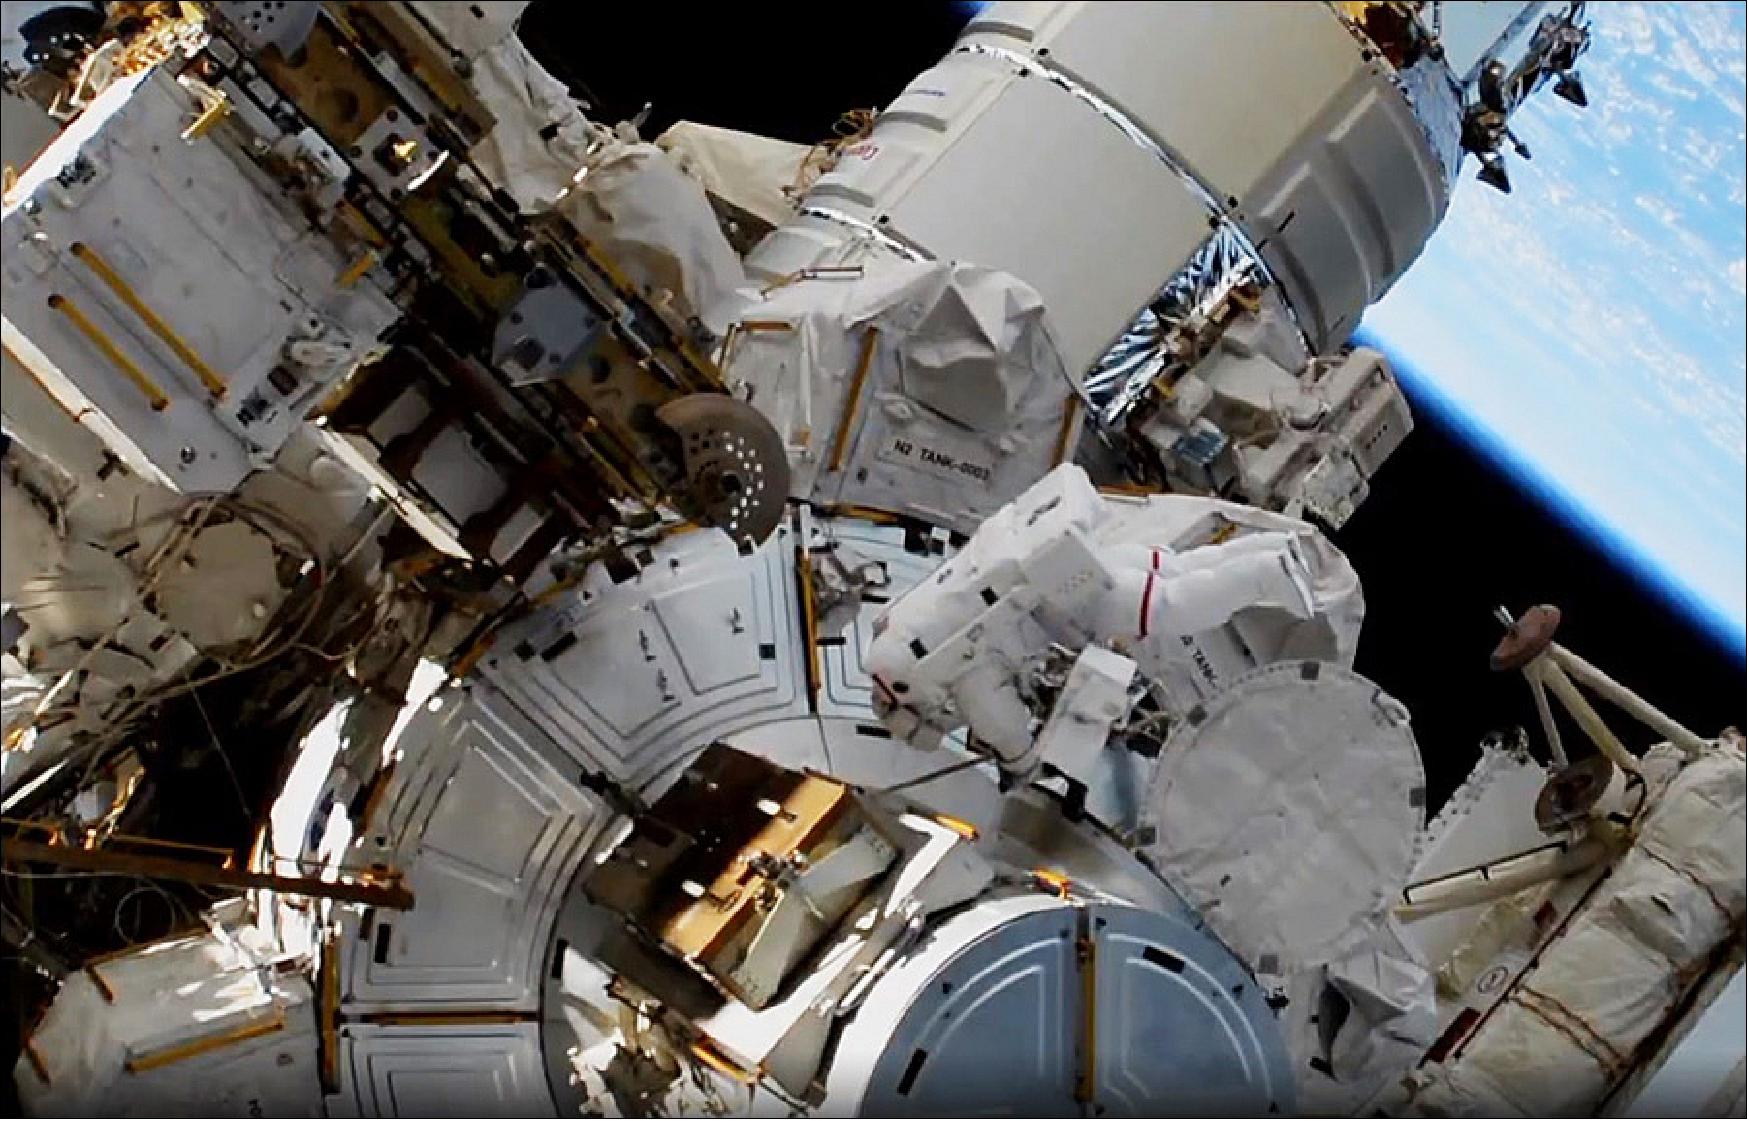 Figure 122: NASA astronaut Jessica Meir enters the Quest airlock to complete a spacewalk after swapping batteries on the International Space Station that store and distribute solar power collected for the solar arrays (image credit: NASA)